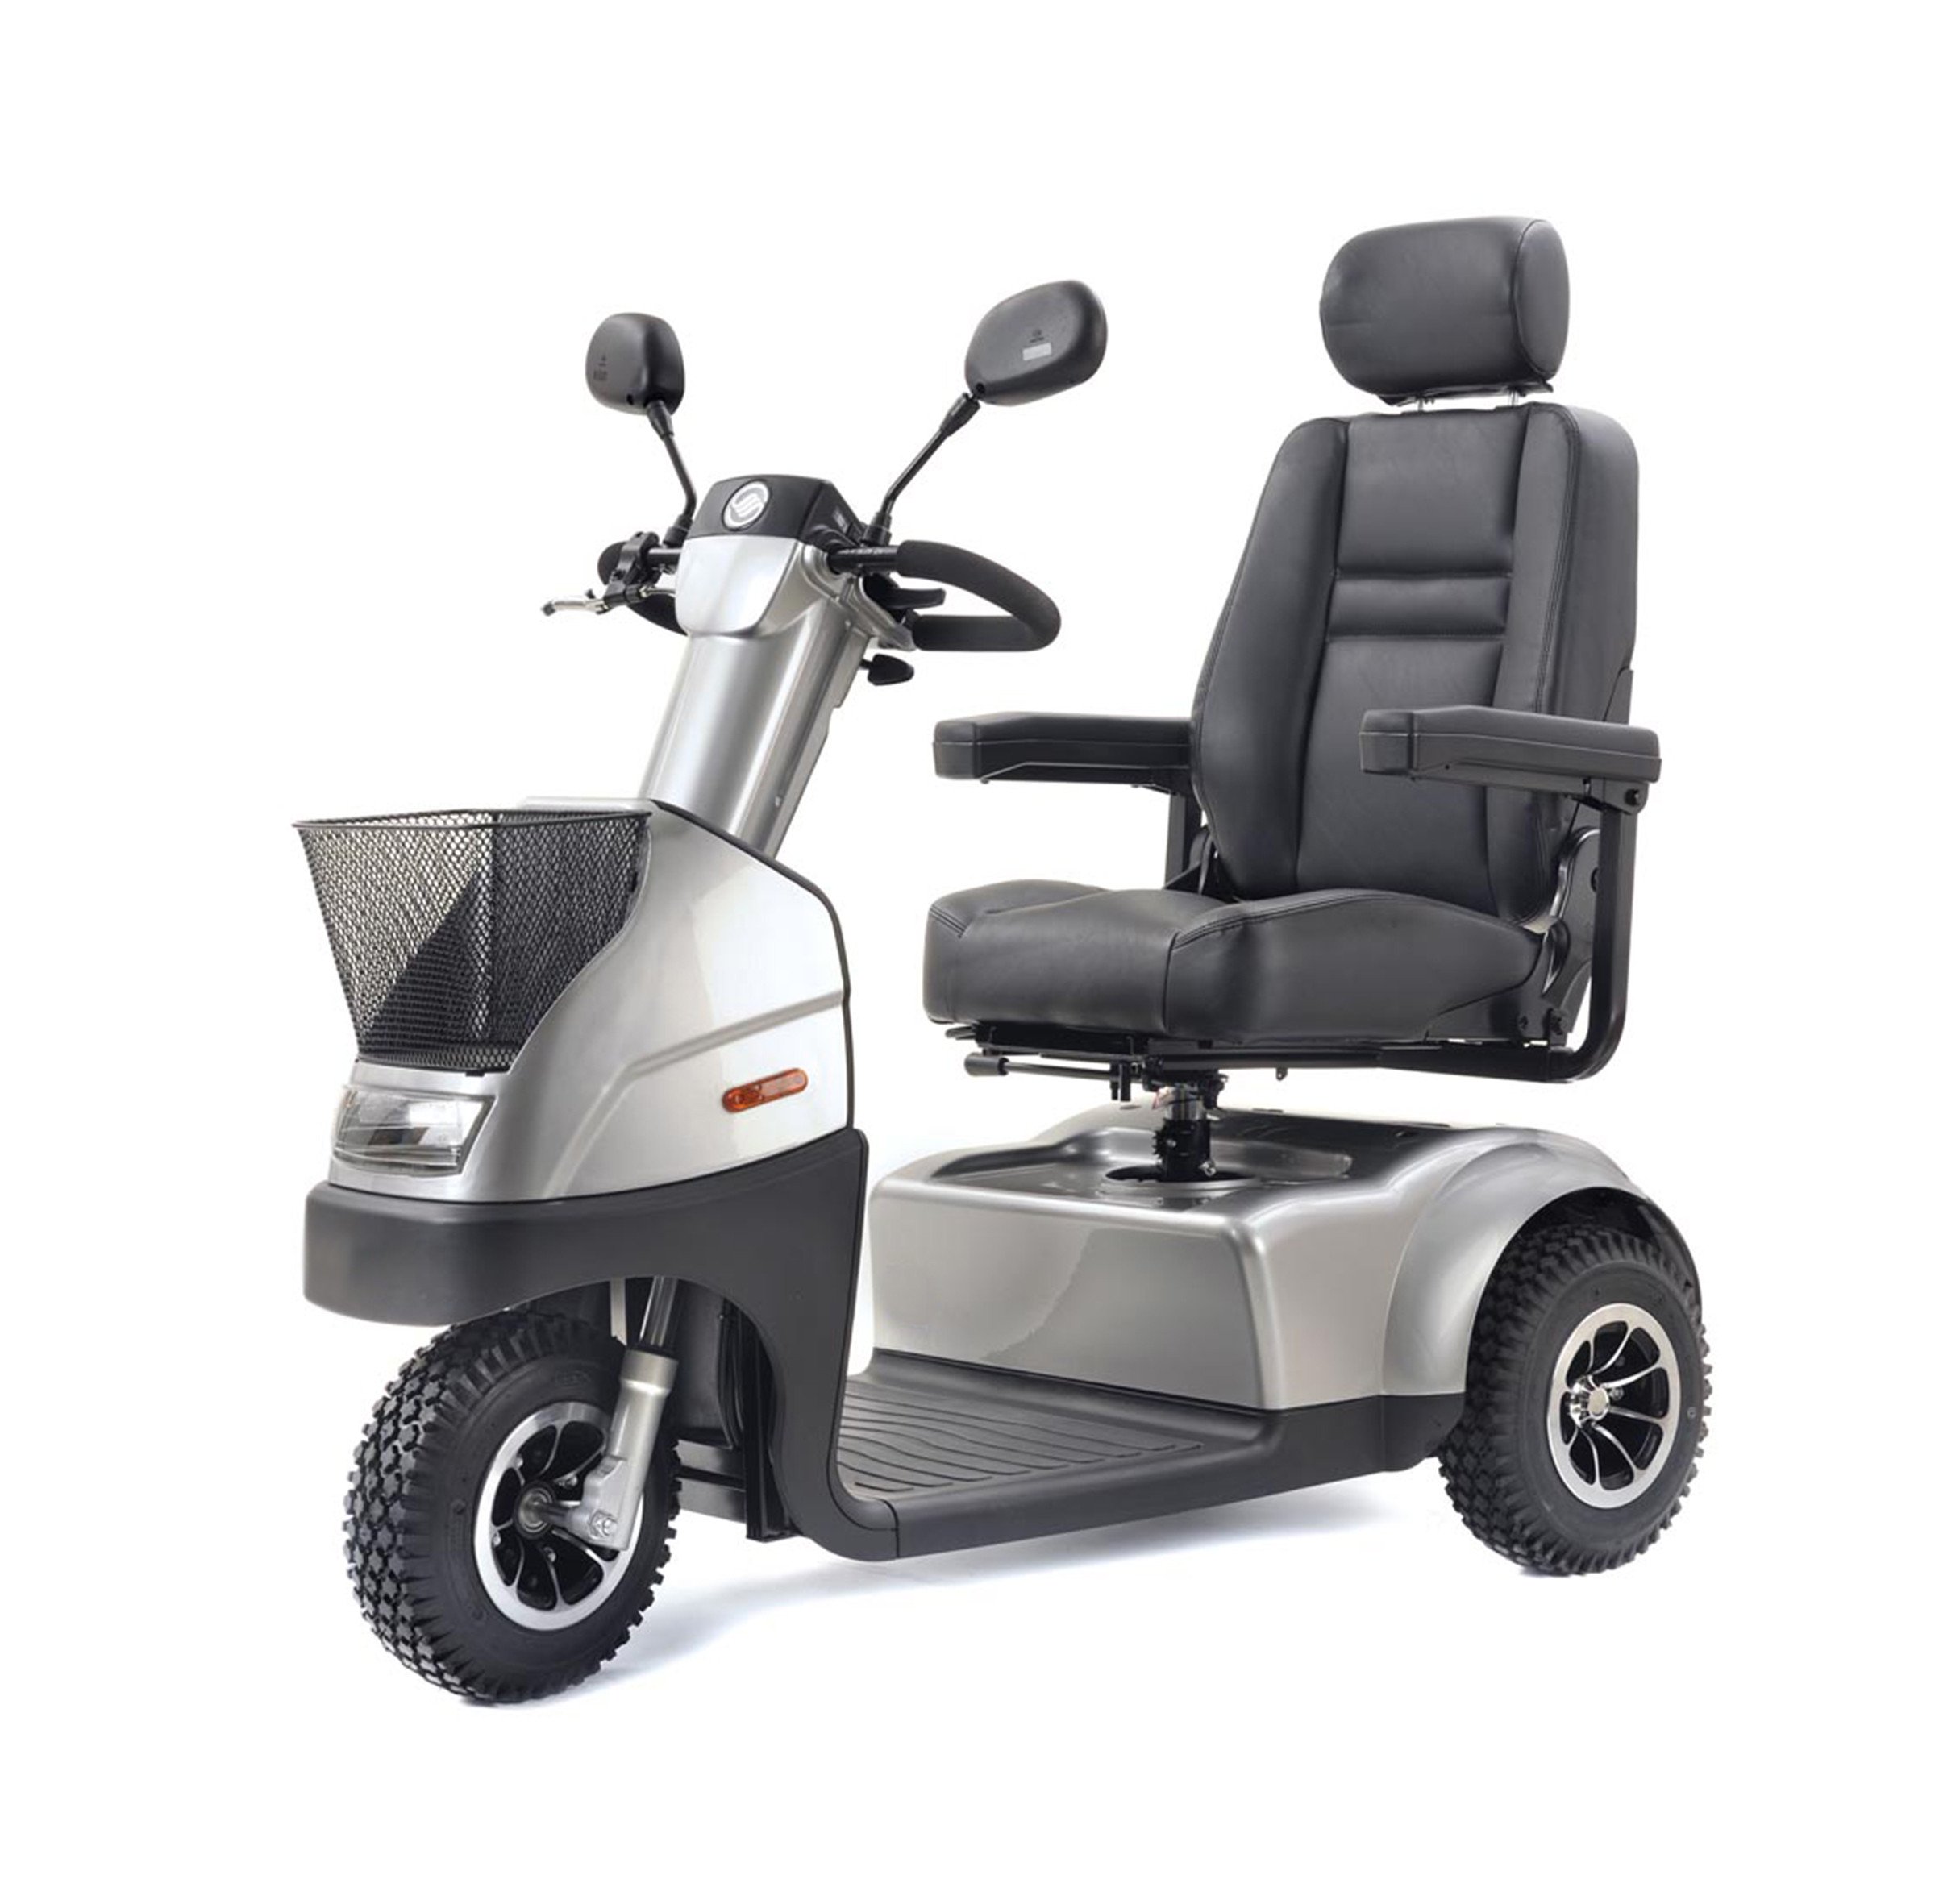 Afiscooter C3 3-Wheel Scooter - Silver